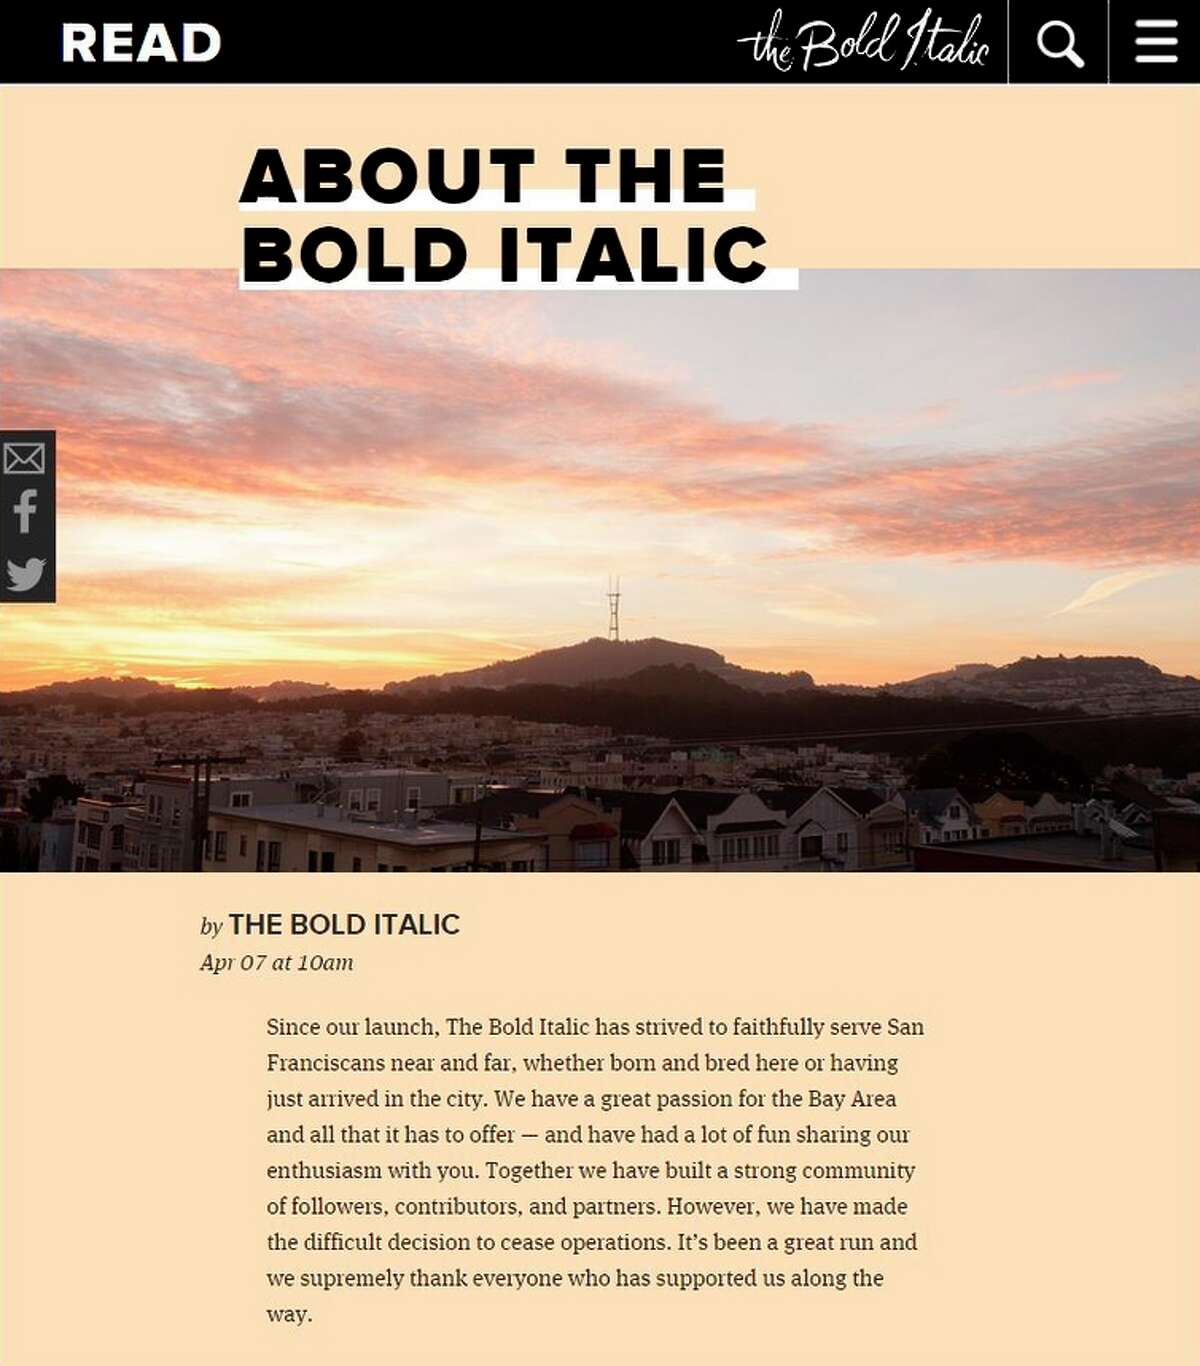 The Bold Italic, created by media giant Gannett, had plans to expand to other cities, but it never did.